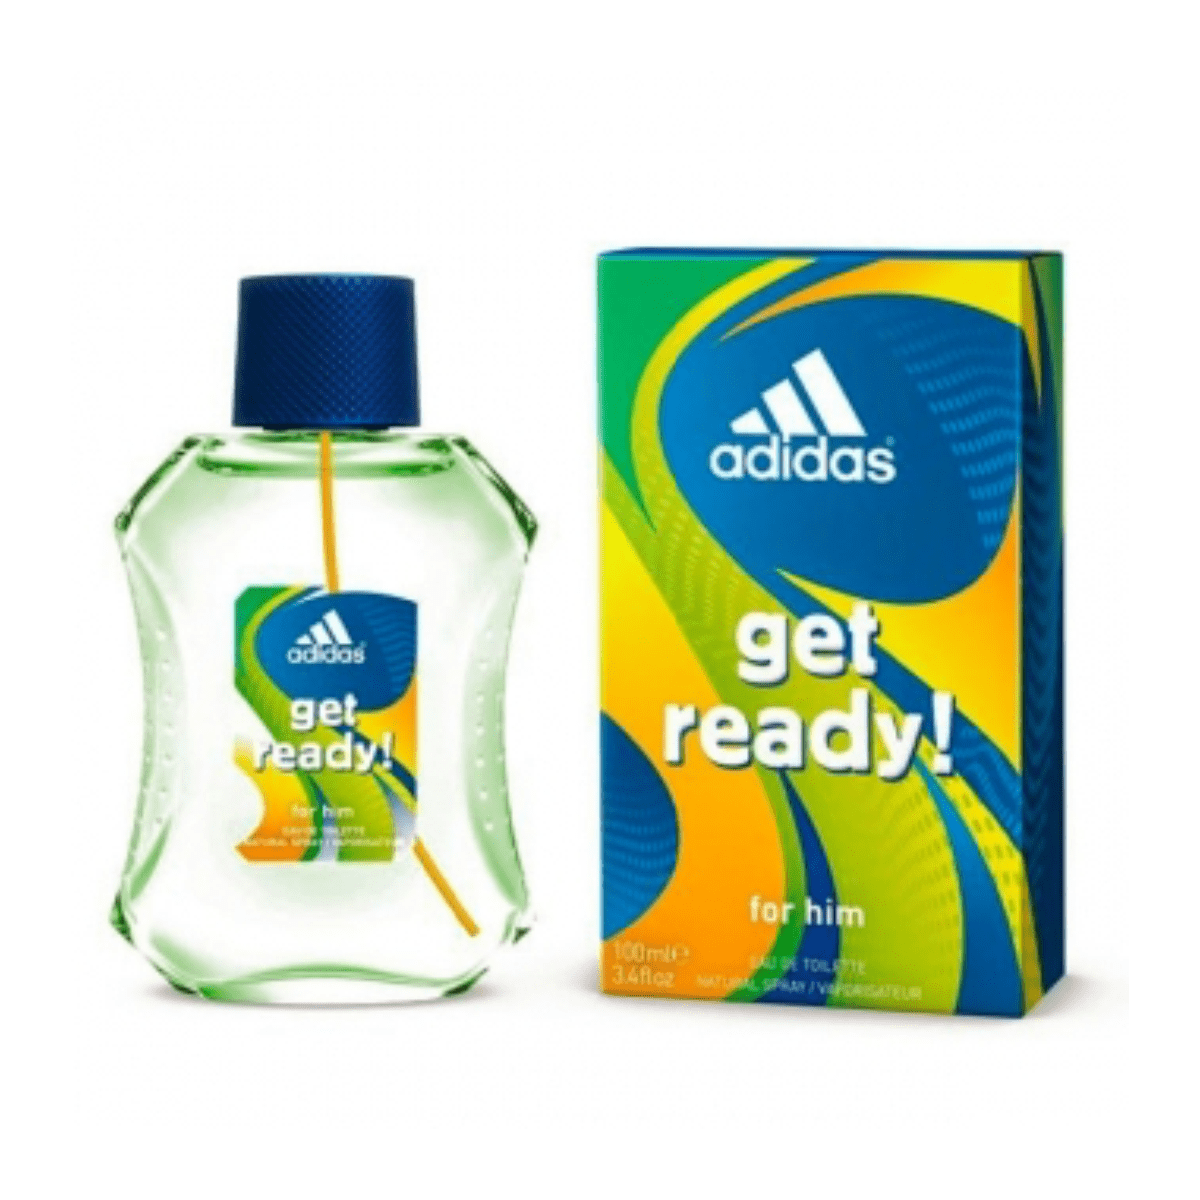 ADIDAS COLONIA HOMBRE GET READY 100ML Lusal